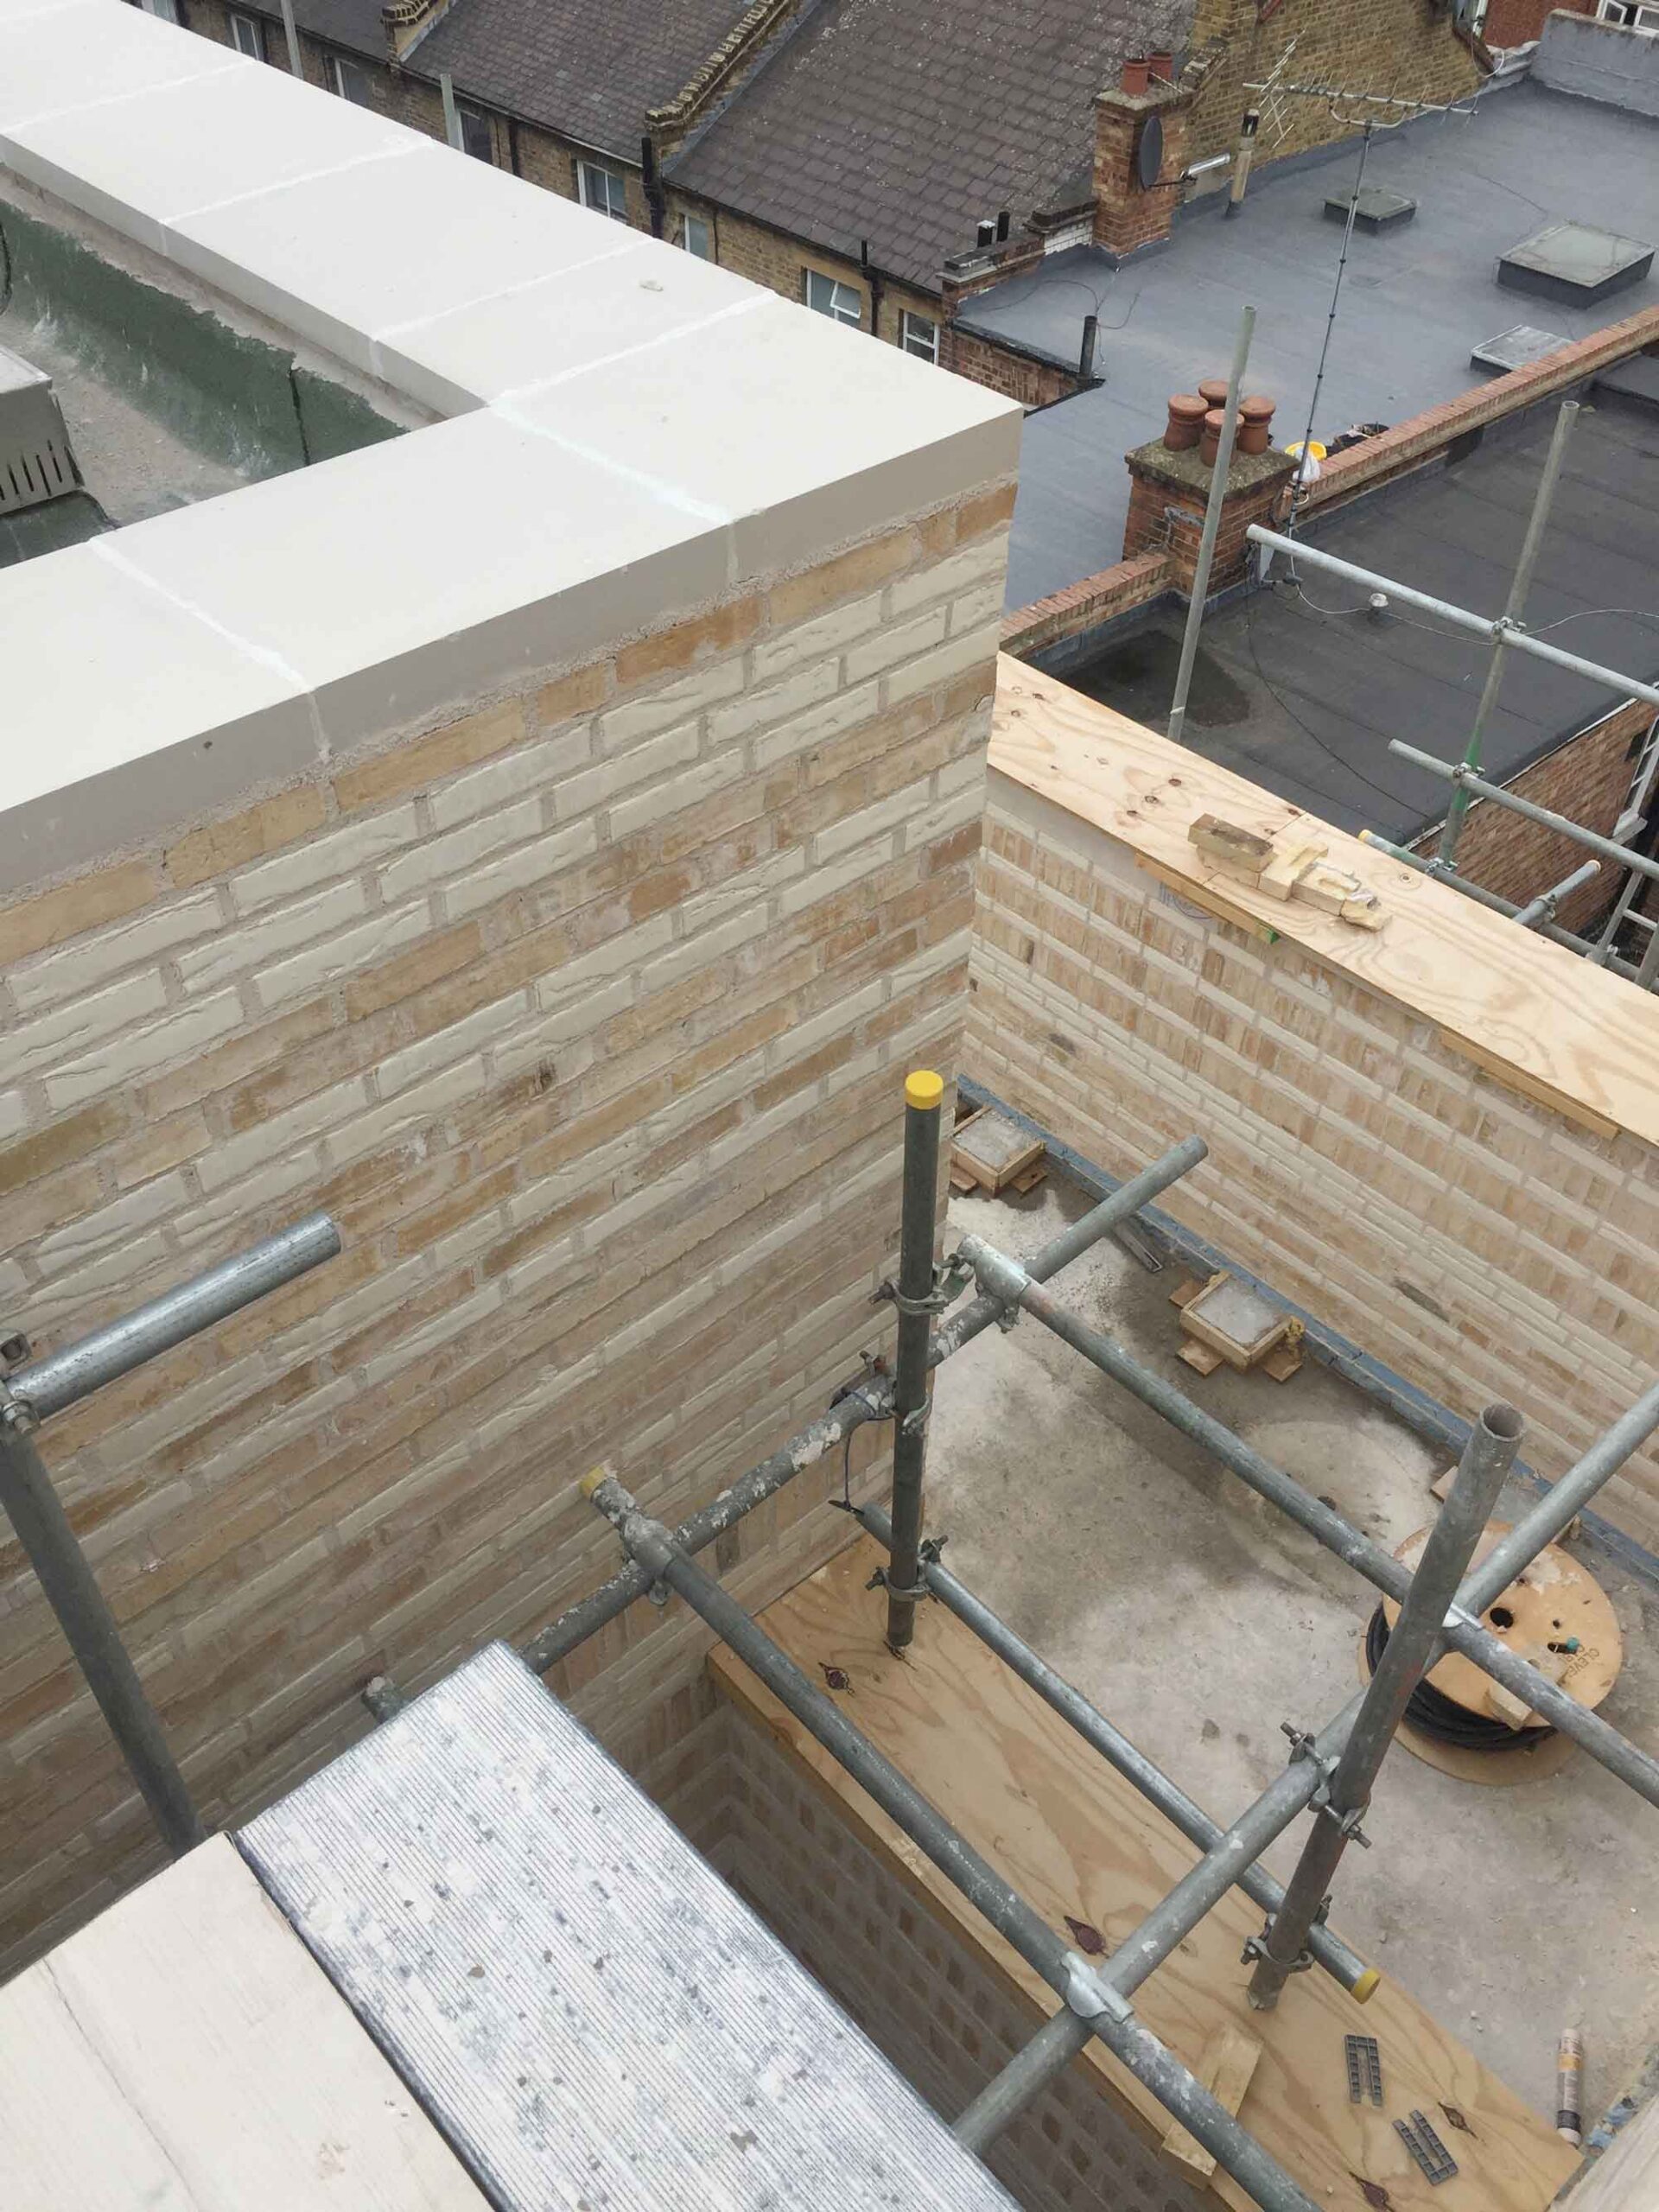 westminster-fire-station-openstudio-architects-stone-coping-detail